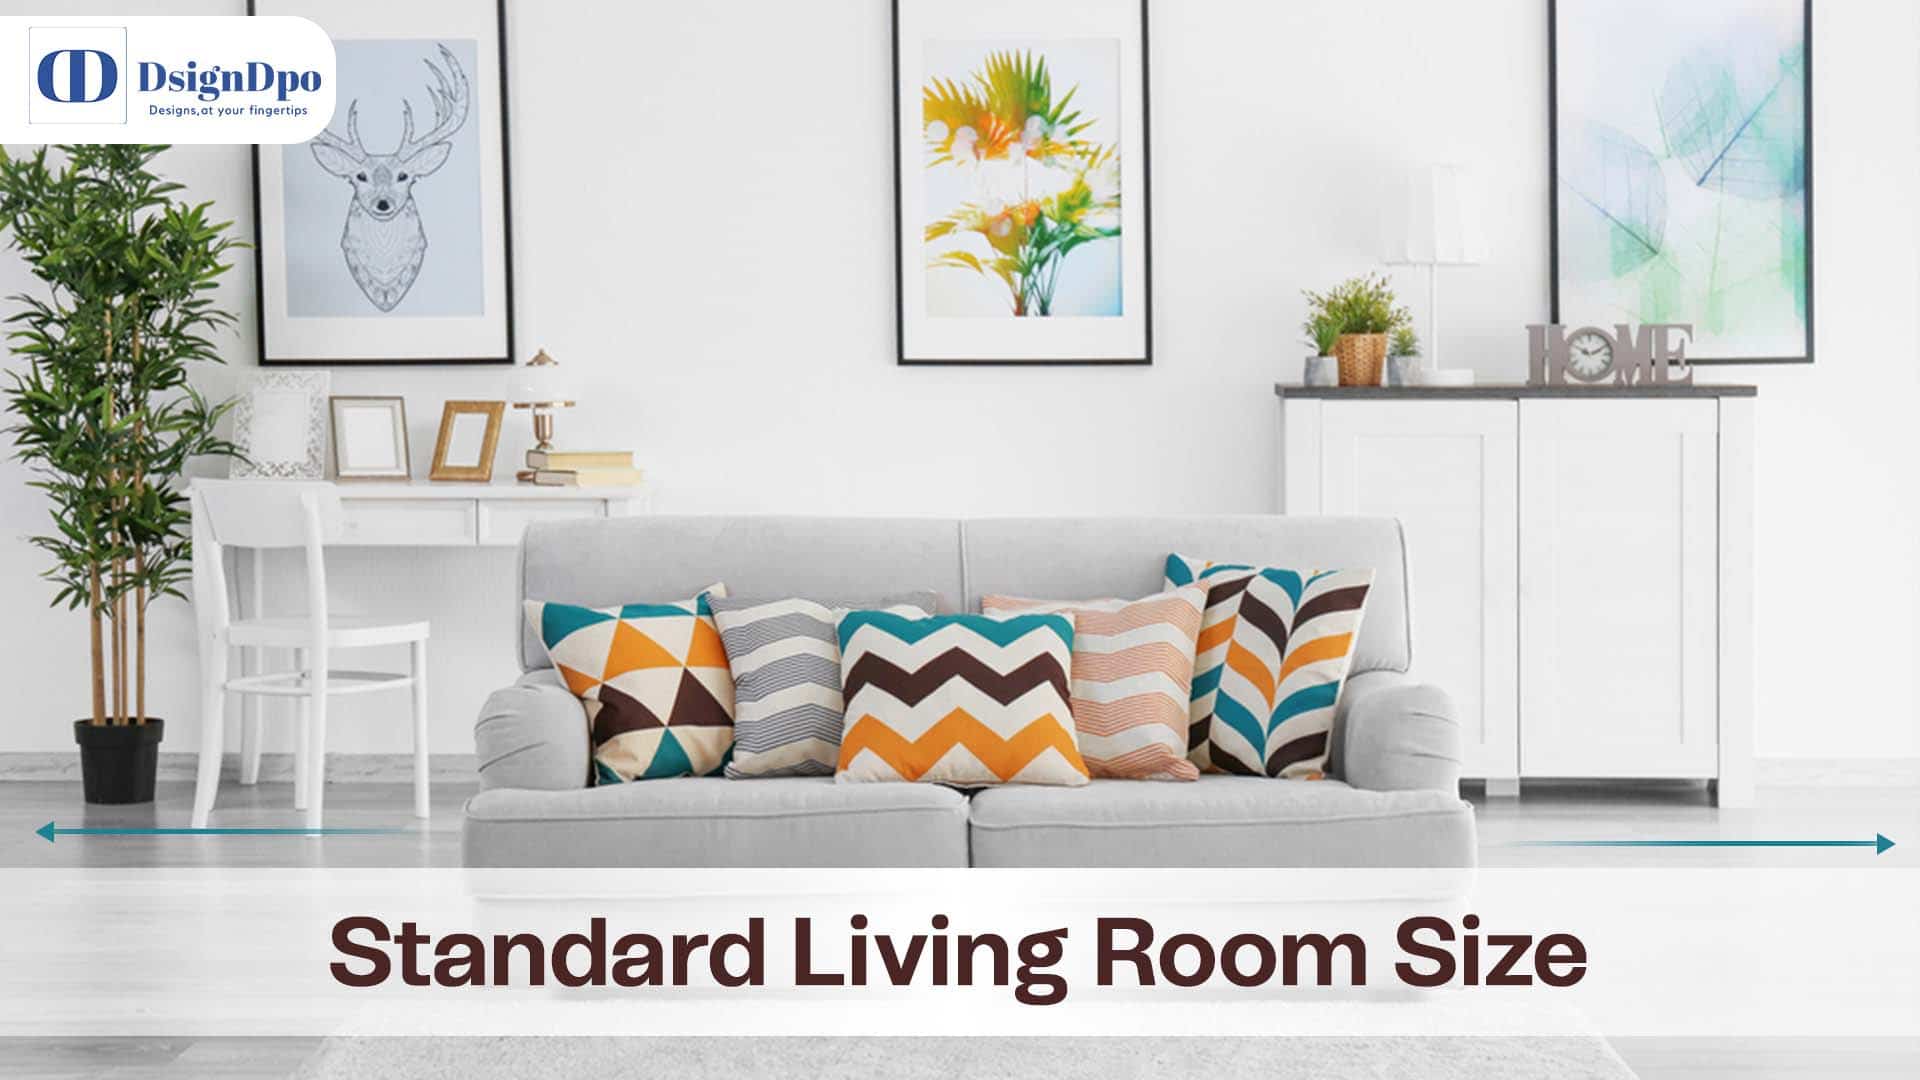 Standard Living Room Size in India